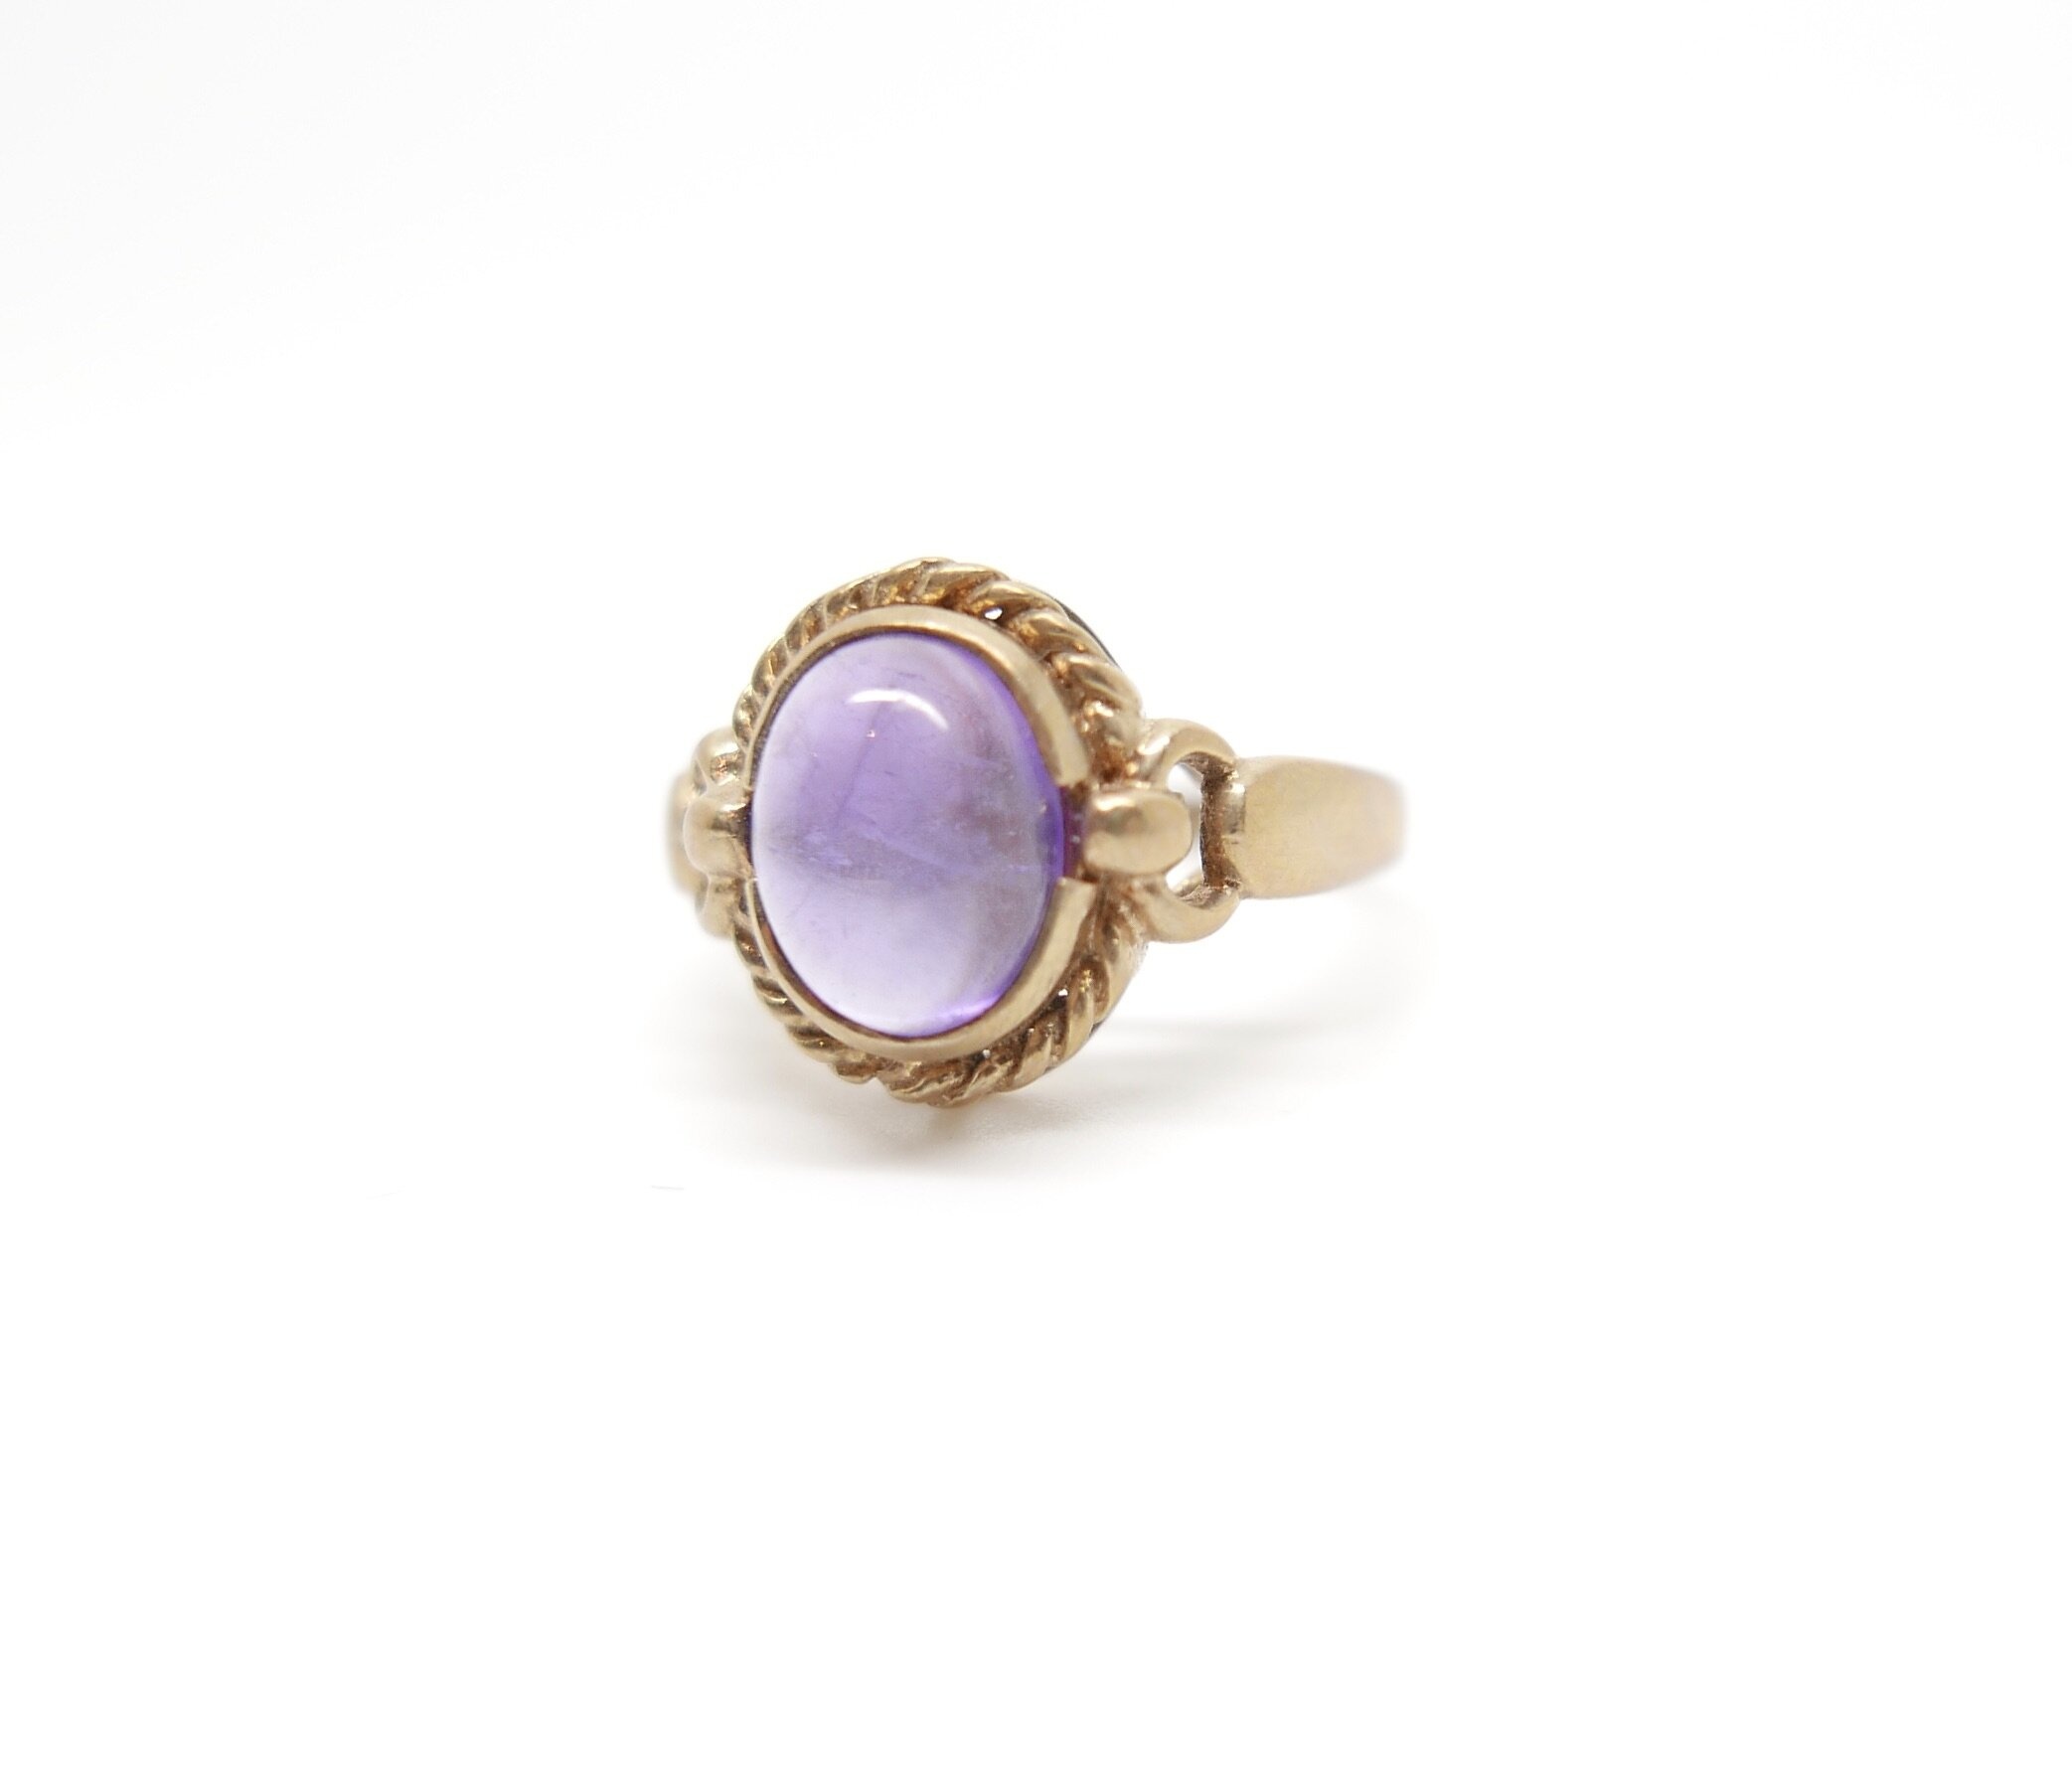 Cabochon jewelry, Vintage amethyst, 9ct gold ring, Antique jewelry boutique, 2090x1790 HD Desktop